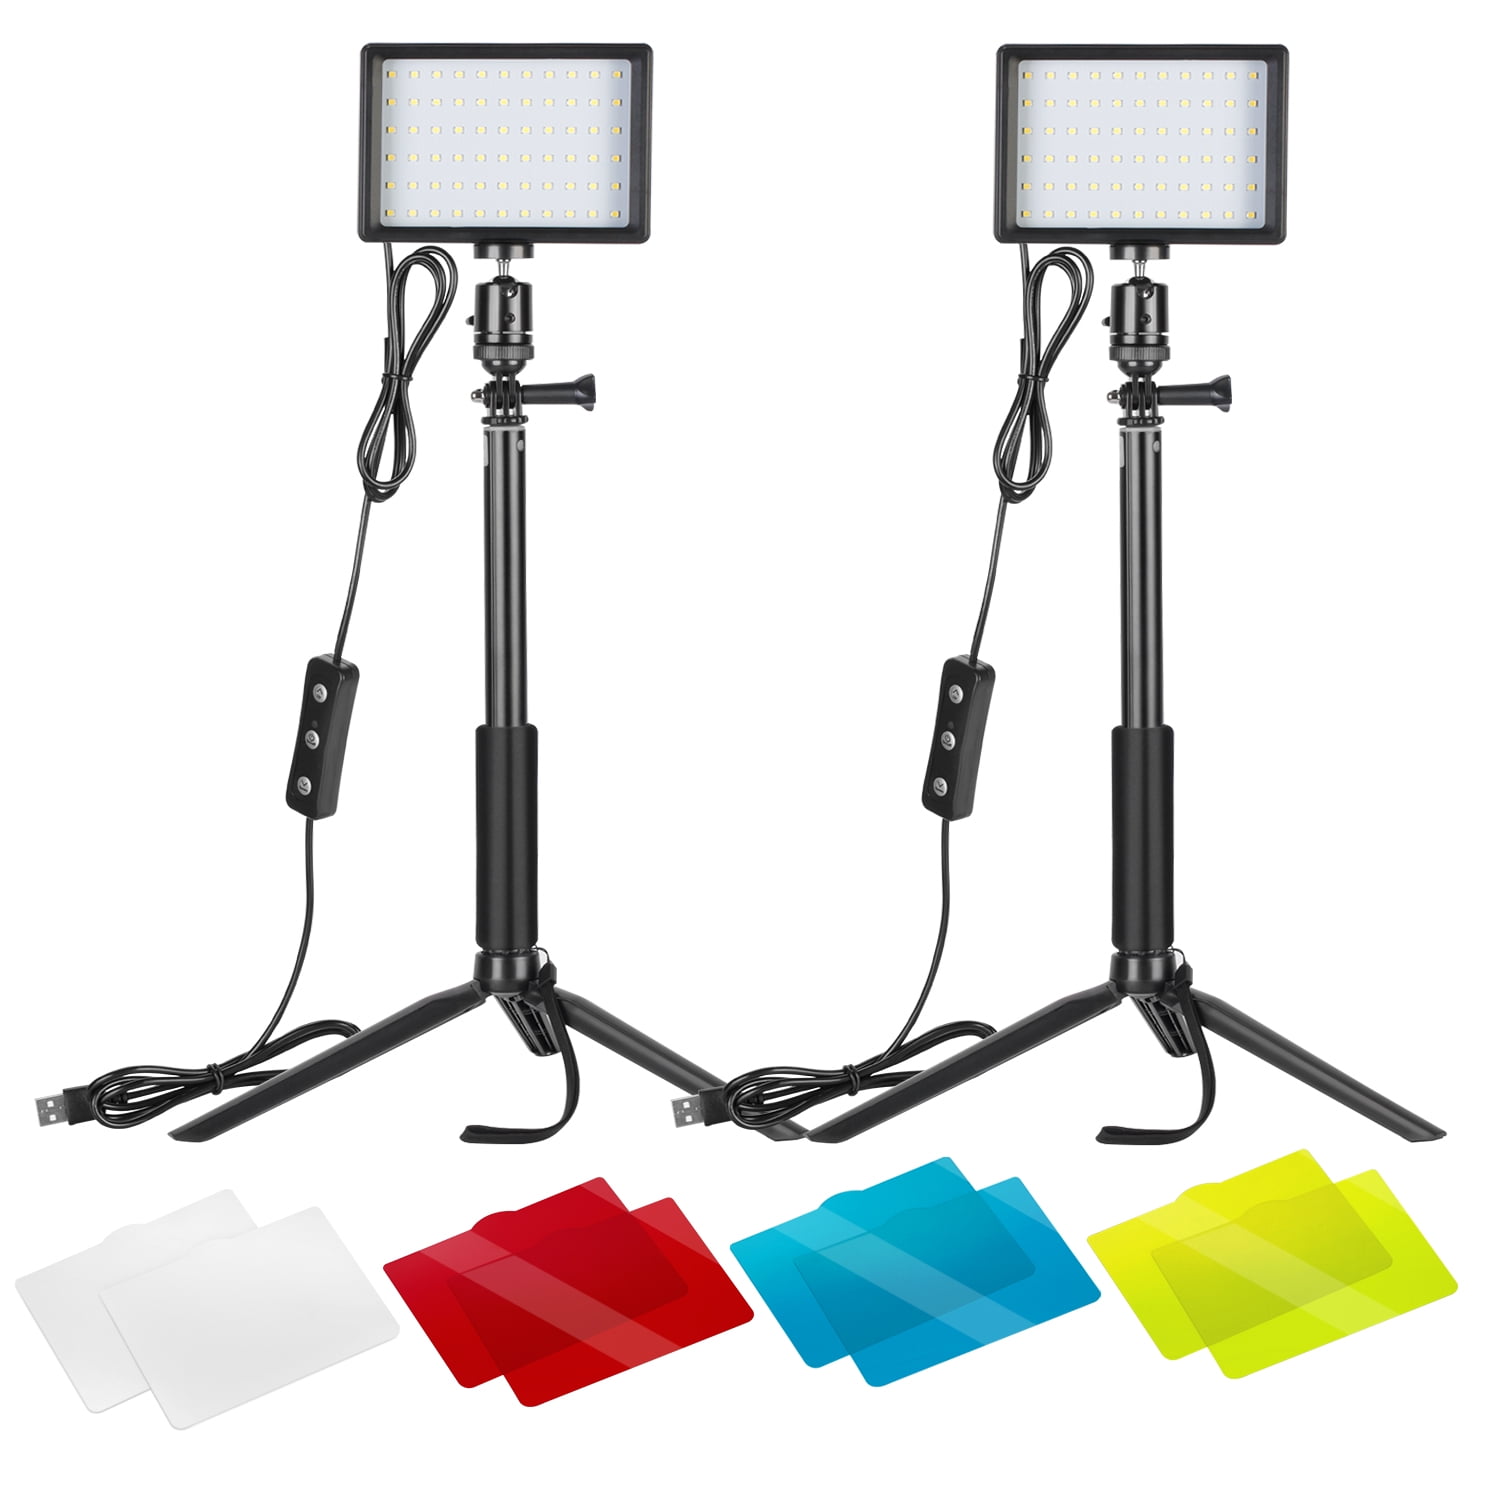 LED Panel Kit for Video Photography Studio Continuous White 5600k Photo 